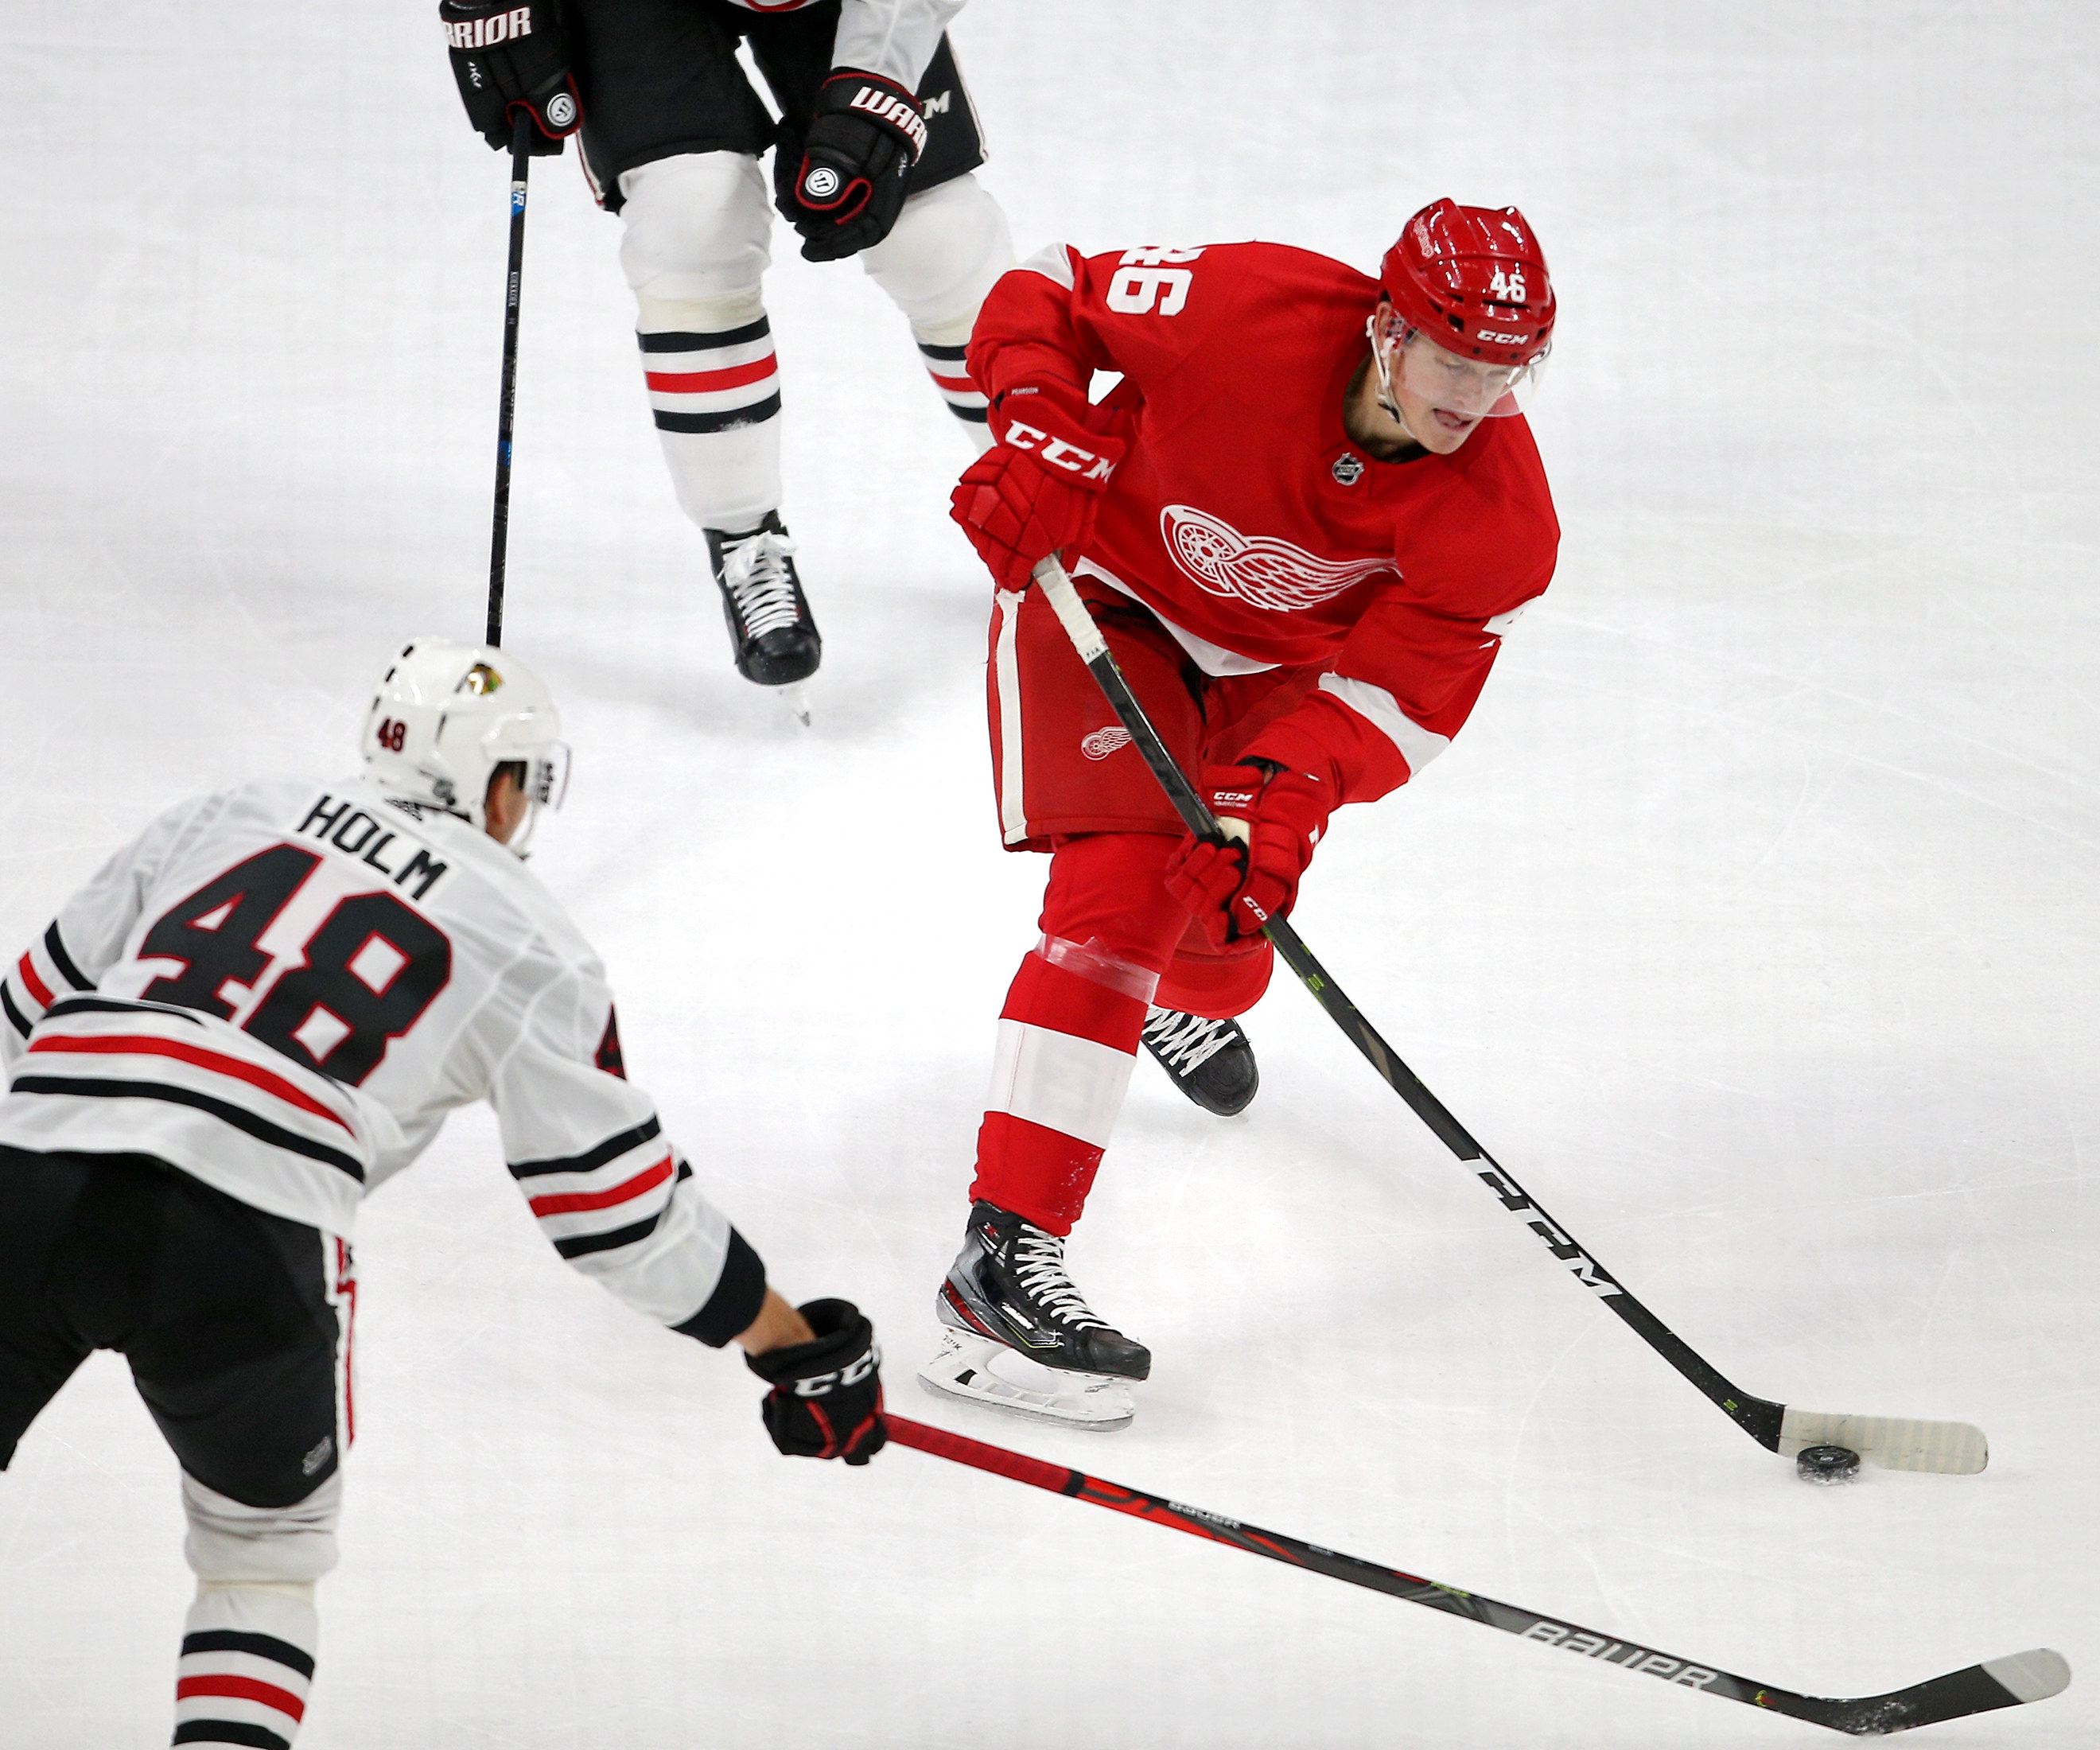 Detroit Red Wings re-sign Givani Smith; what's his role?